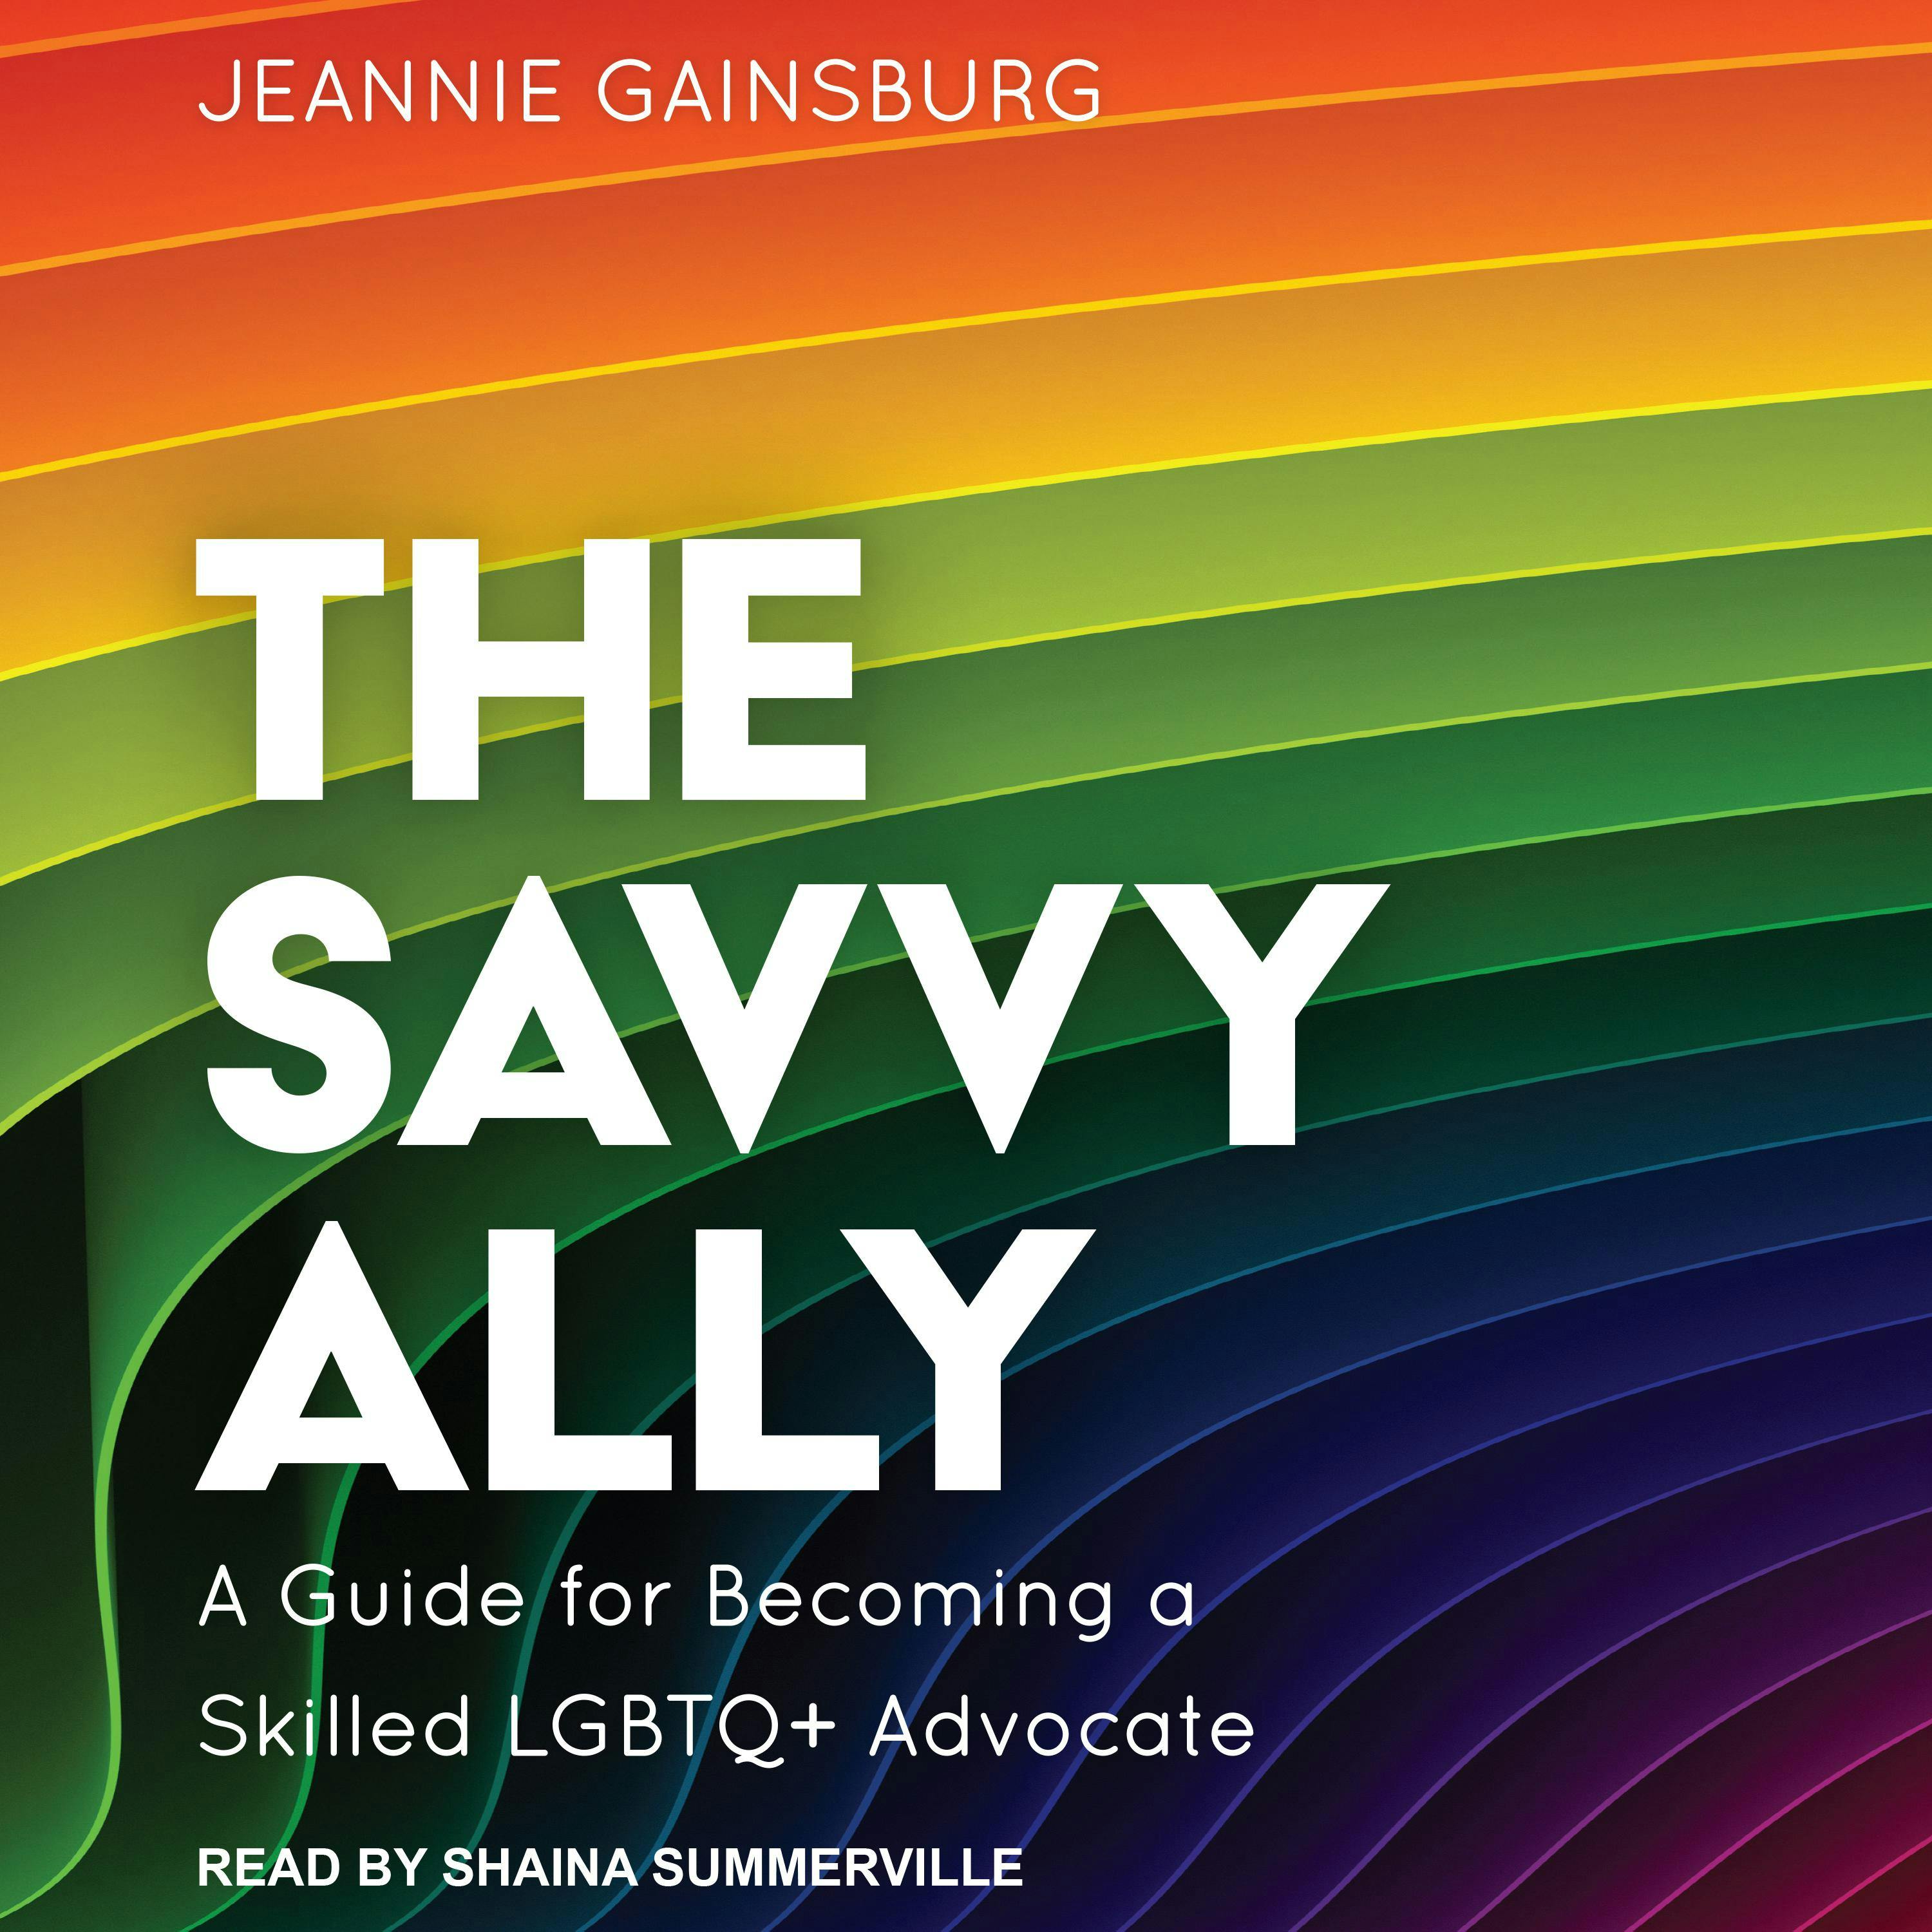 The Savvy Ally: A Guide for Becoming a Skilled LGBTQ+ Advocate - Jeannie Gainsburg